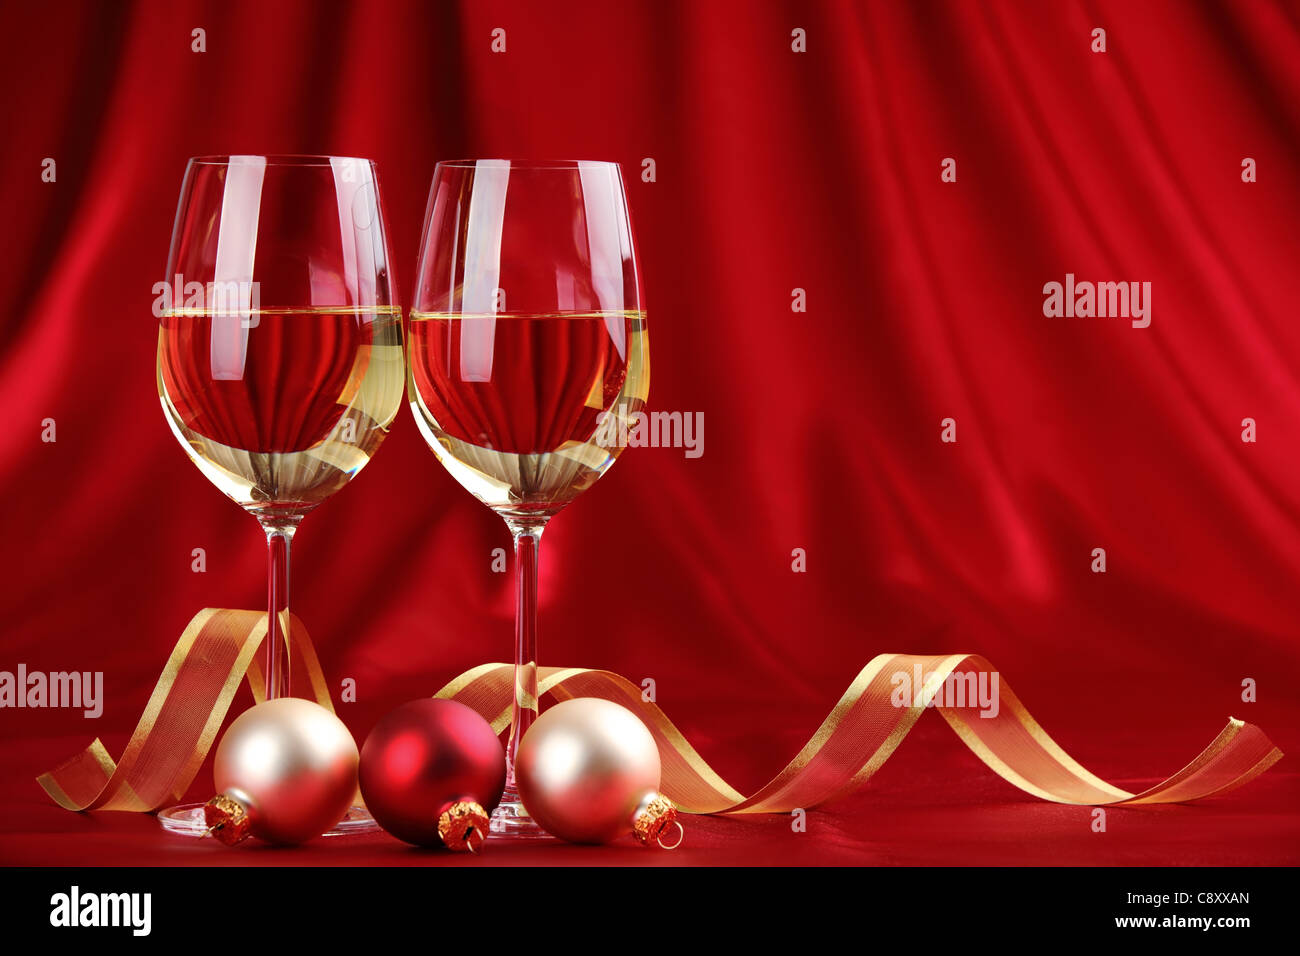 Glasses of champagne with golden ribbon and balls on festive background. Stock Photo